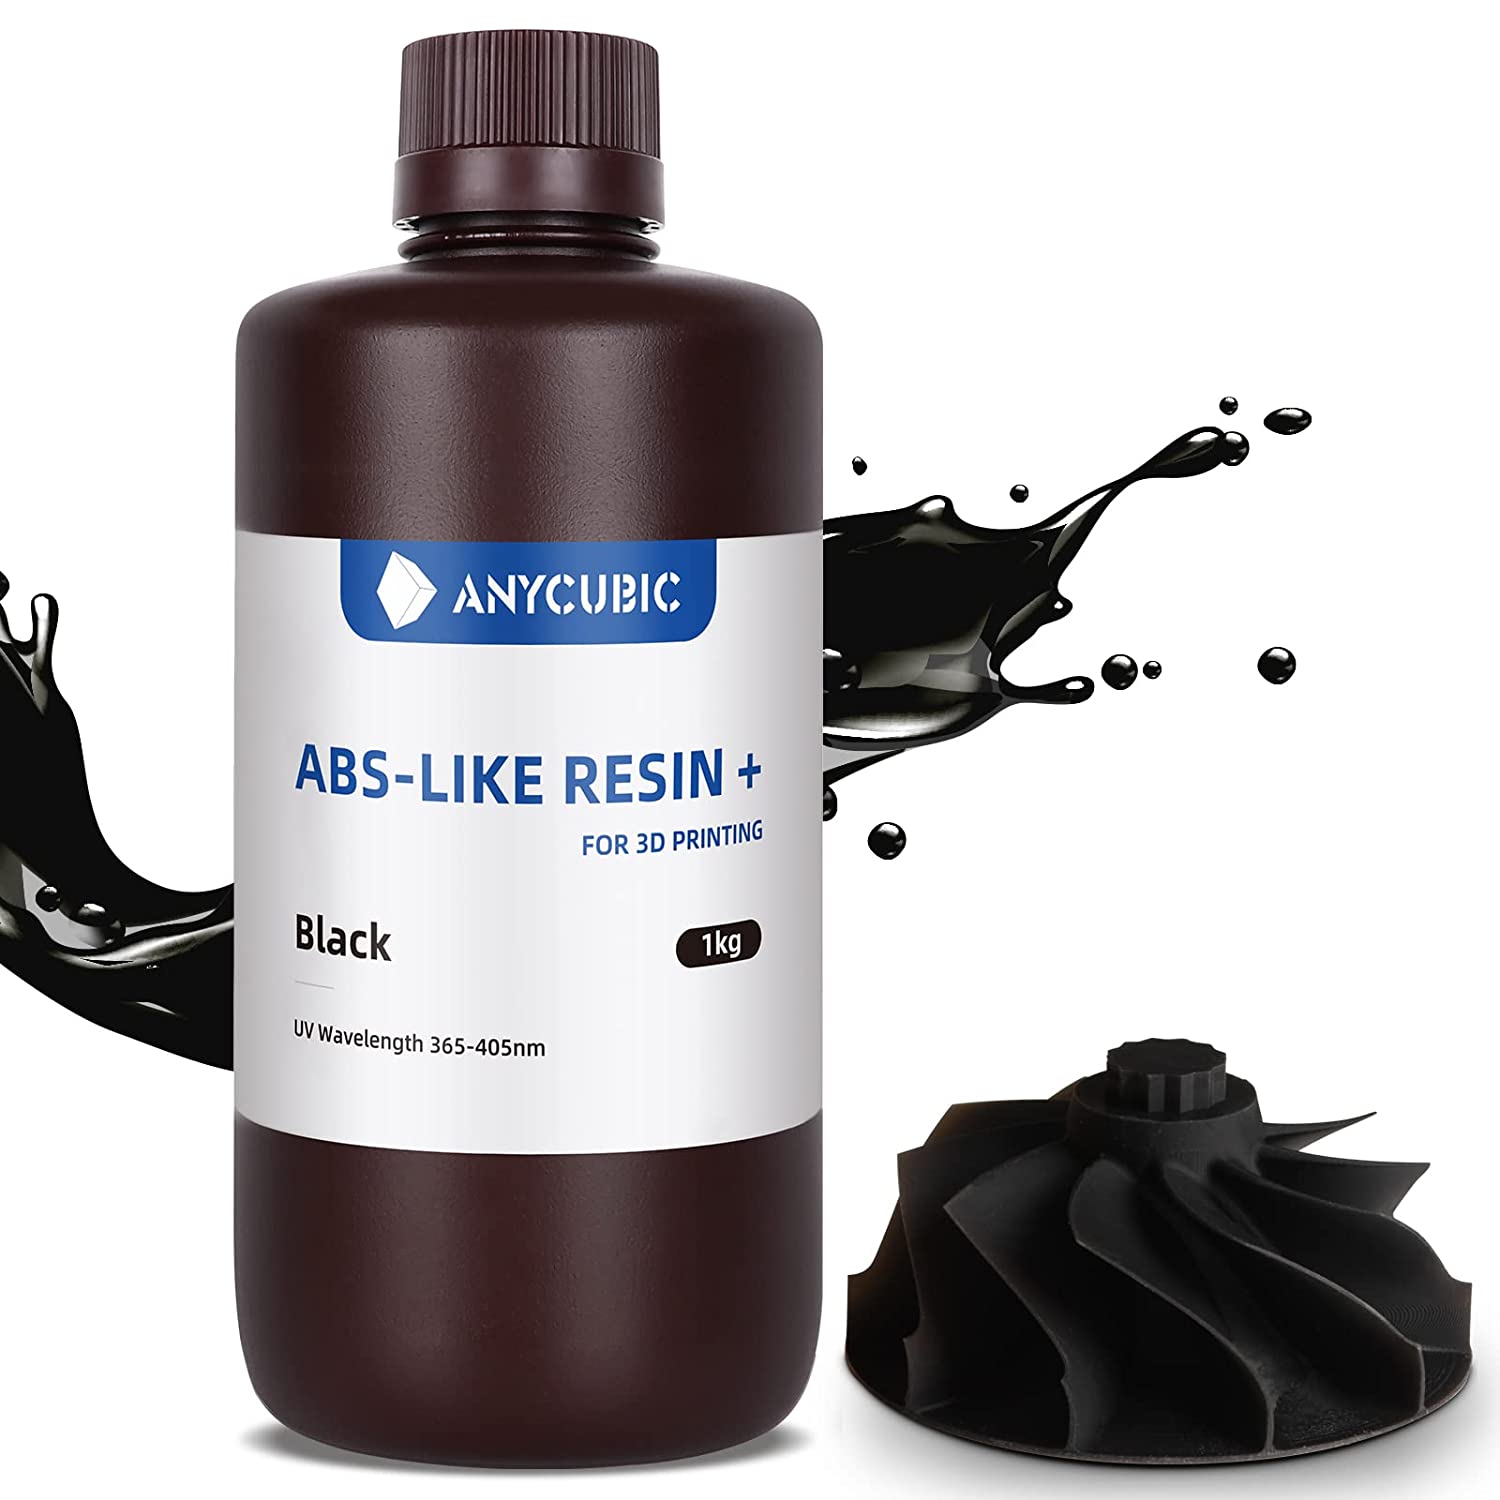 Resina Lavable Al Agua Anycubic 1kg Negro